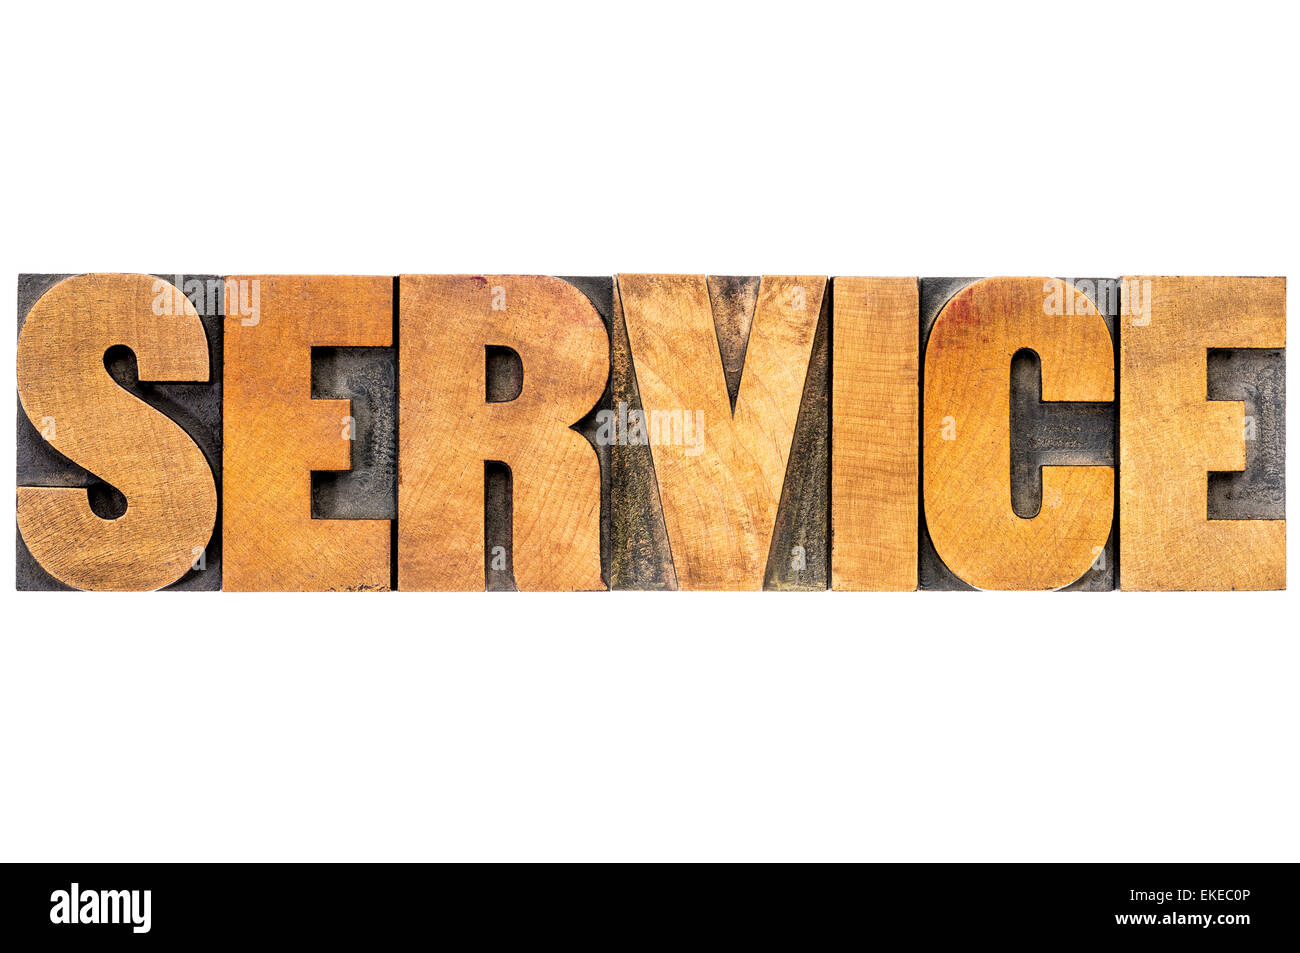 service word  - isolated text in vintage letterpress wood type Stock Photo